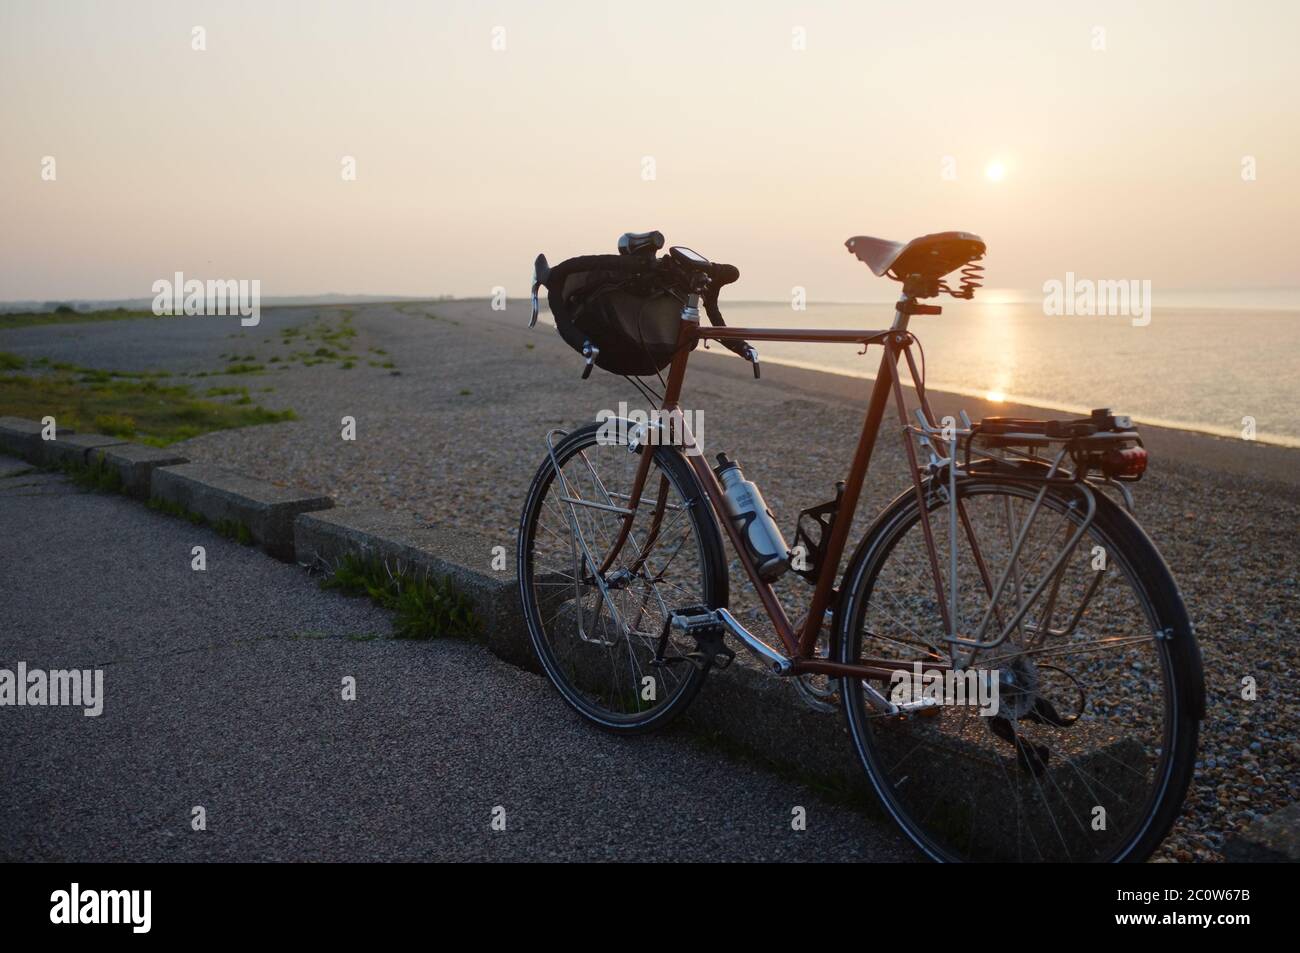 Riding at sunset on a classic racing bicycle. Stock Photo